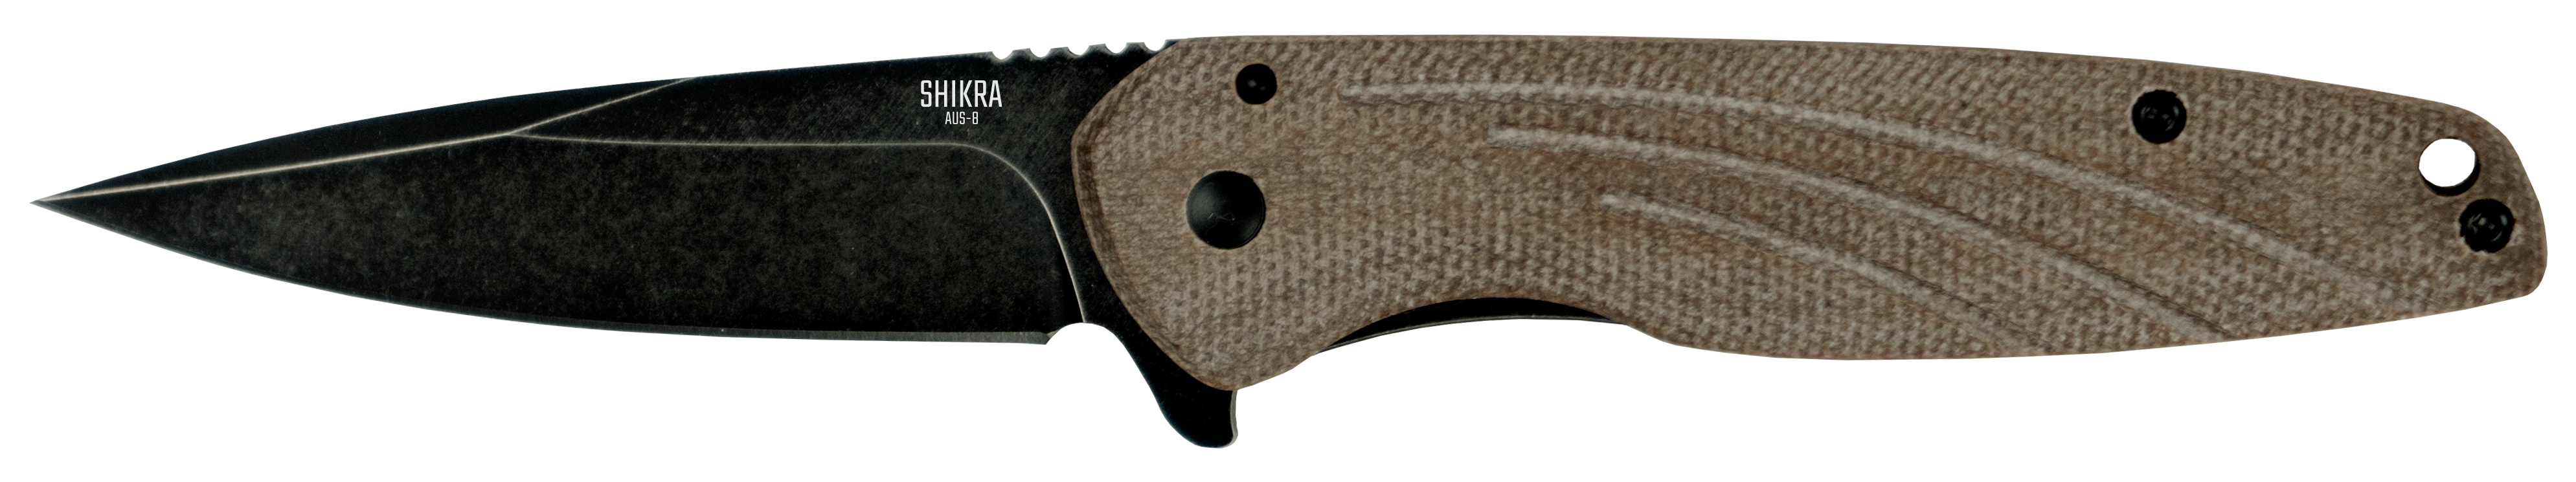 Function and Form Flow with the New Ontario Knife Company® Shikra Folder